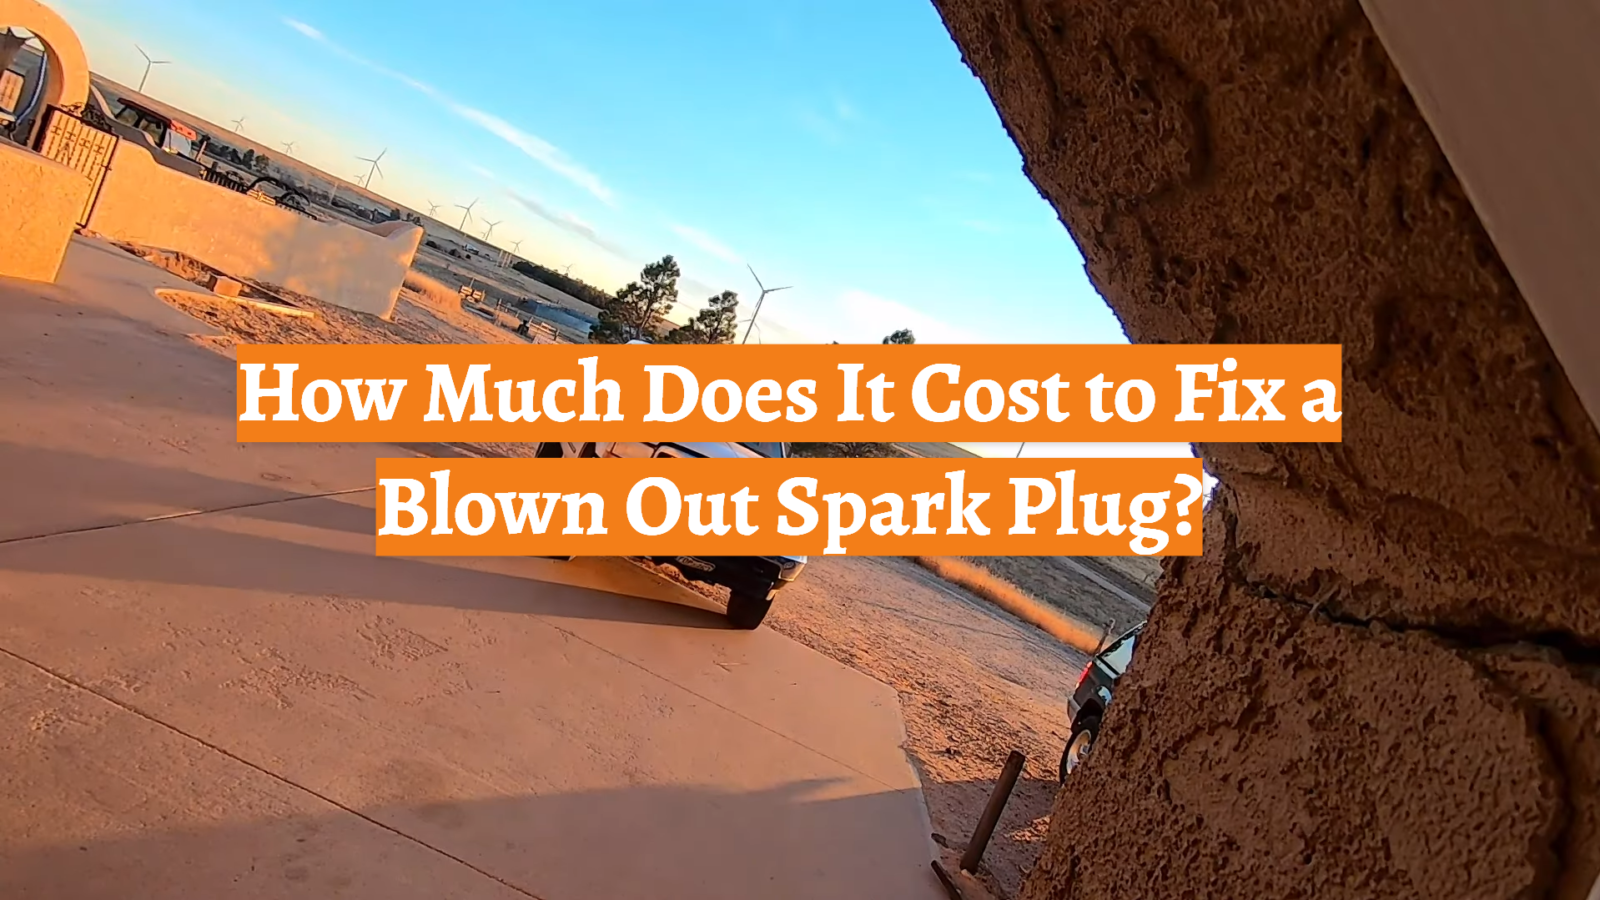 How Much Does It Cost to Fix a Blown Out Spark Plug?